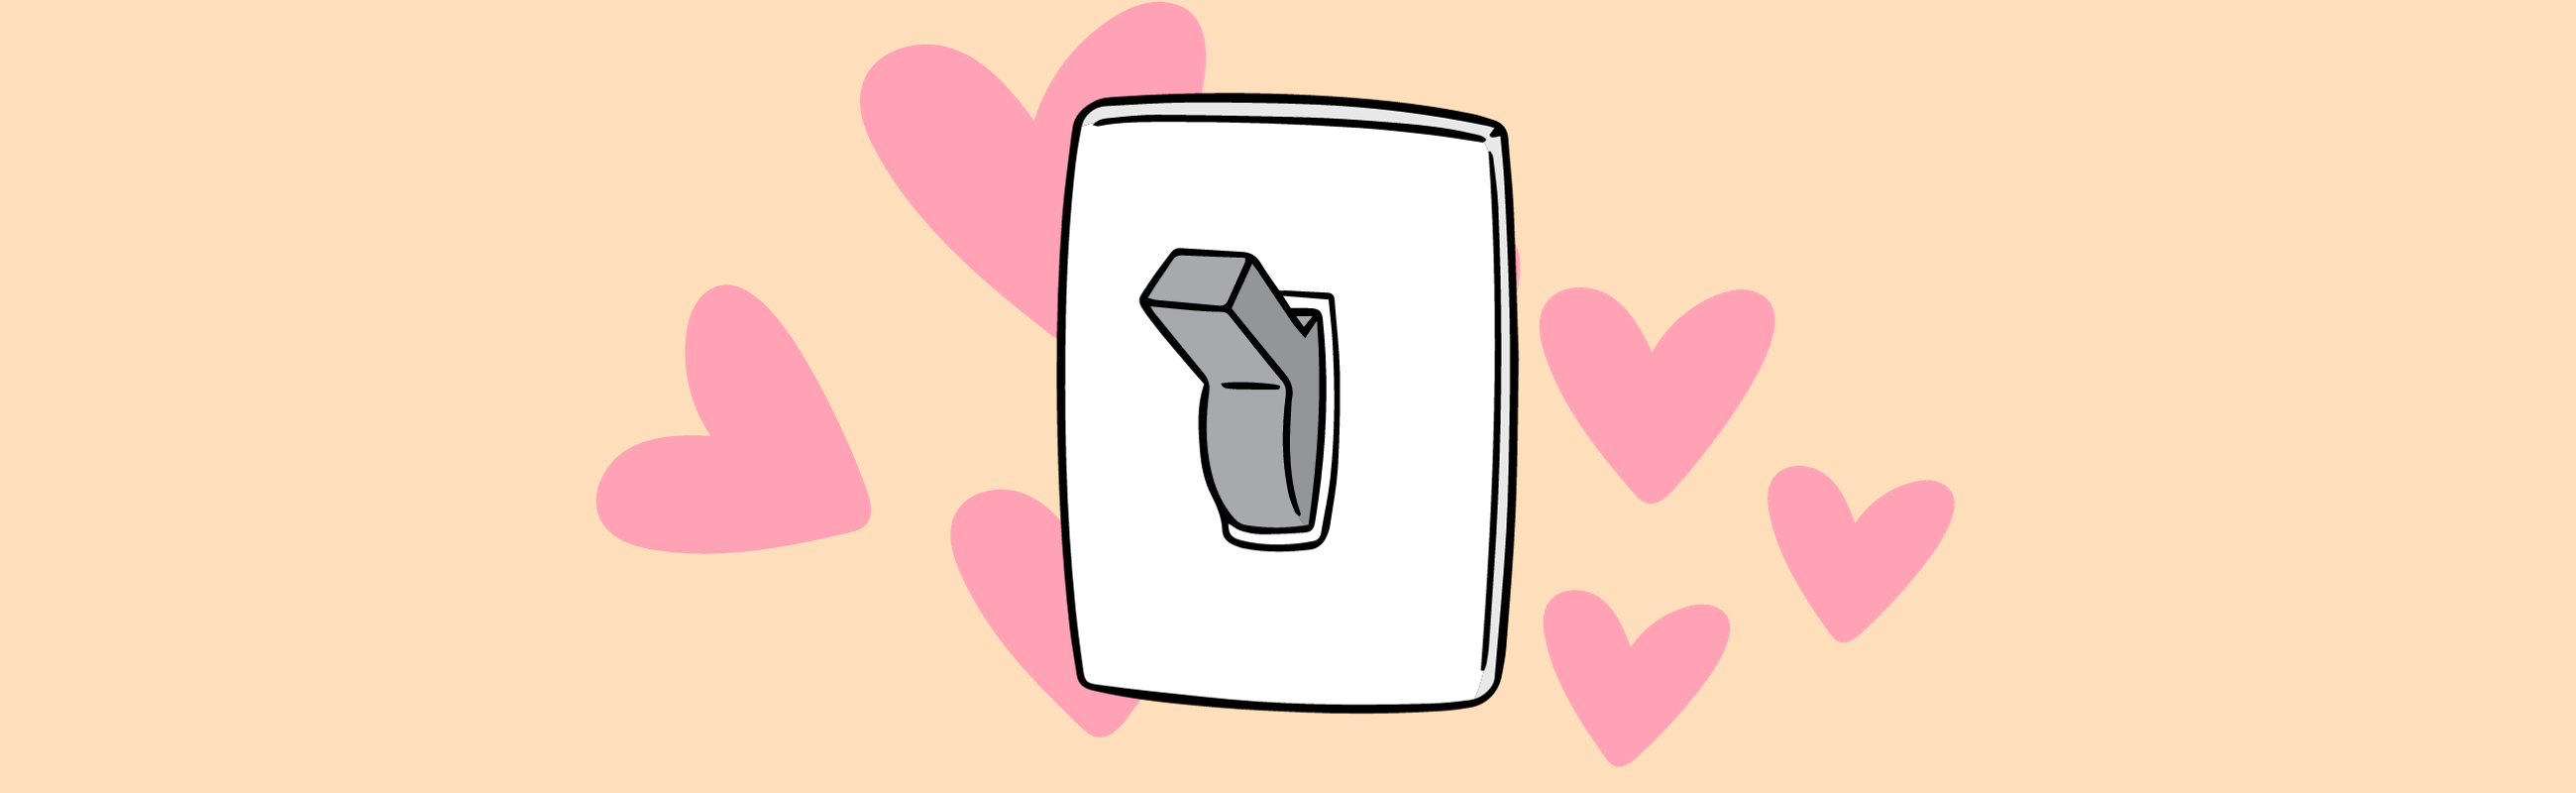 Image depicts a cartoon light switch